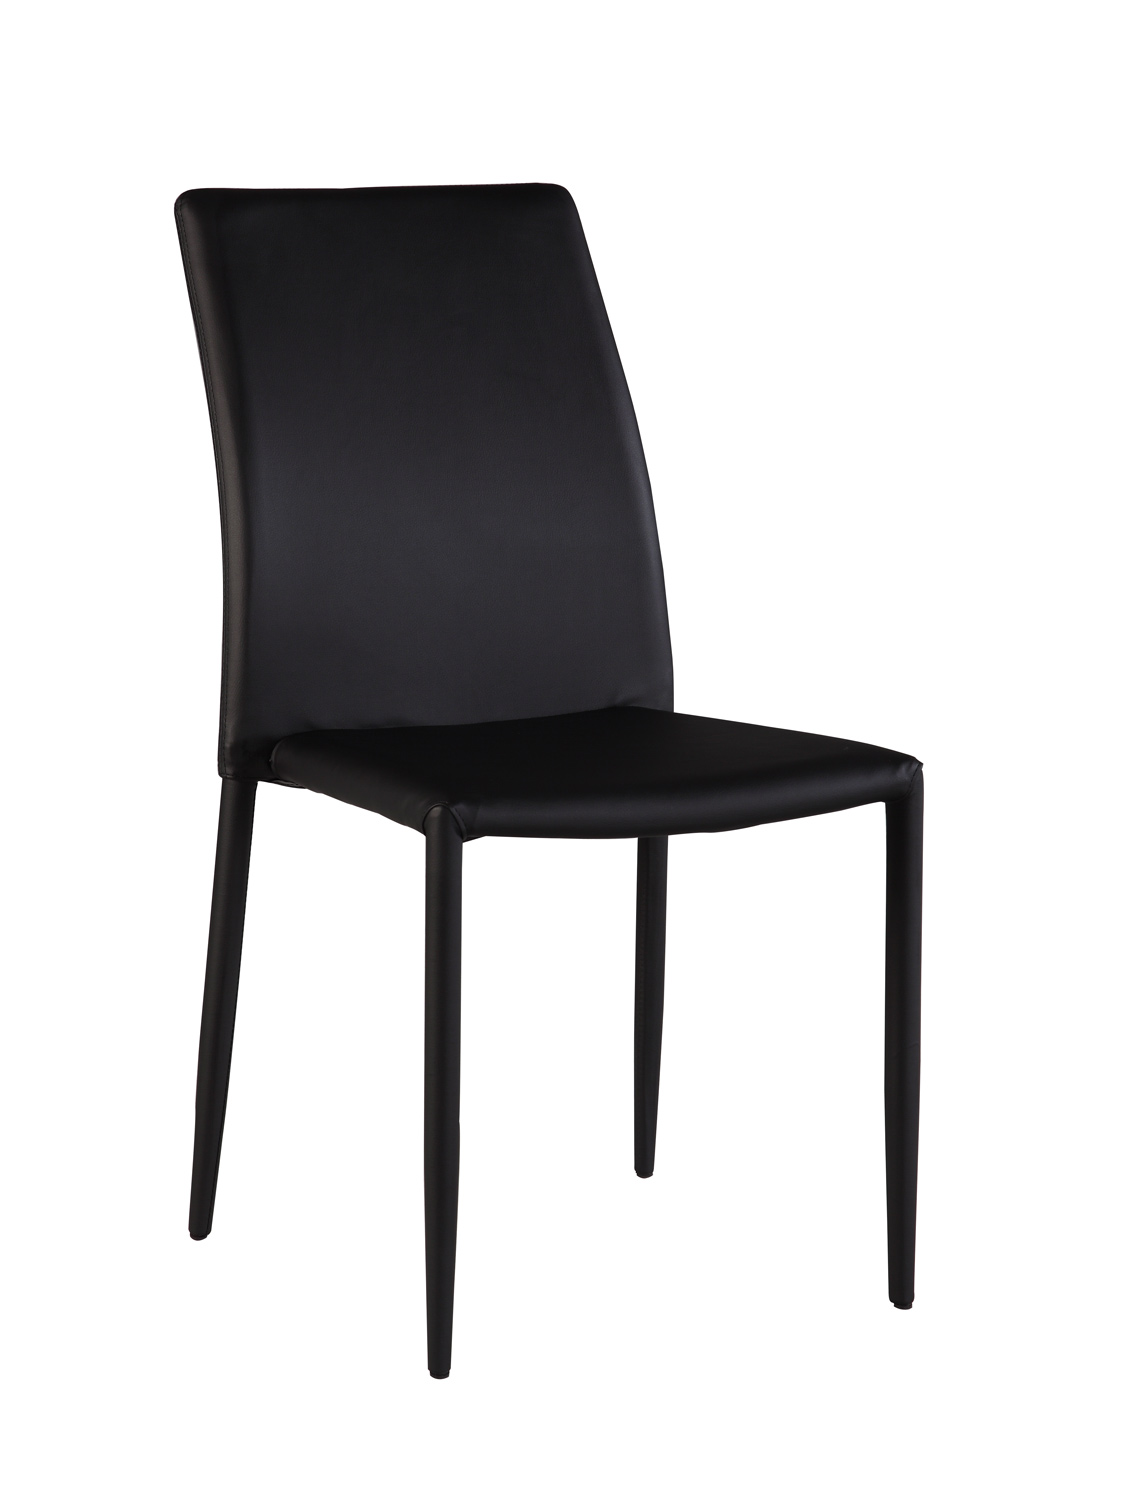 Chintaly Imports Flona Upholstered Back Side Chair - Black